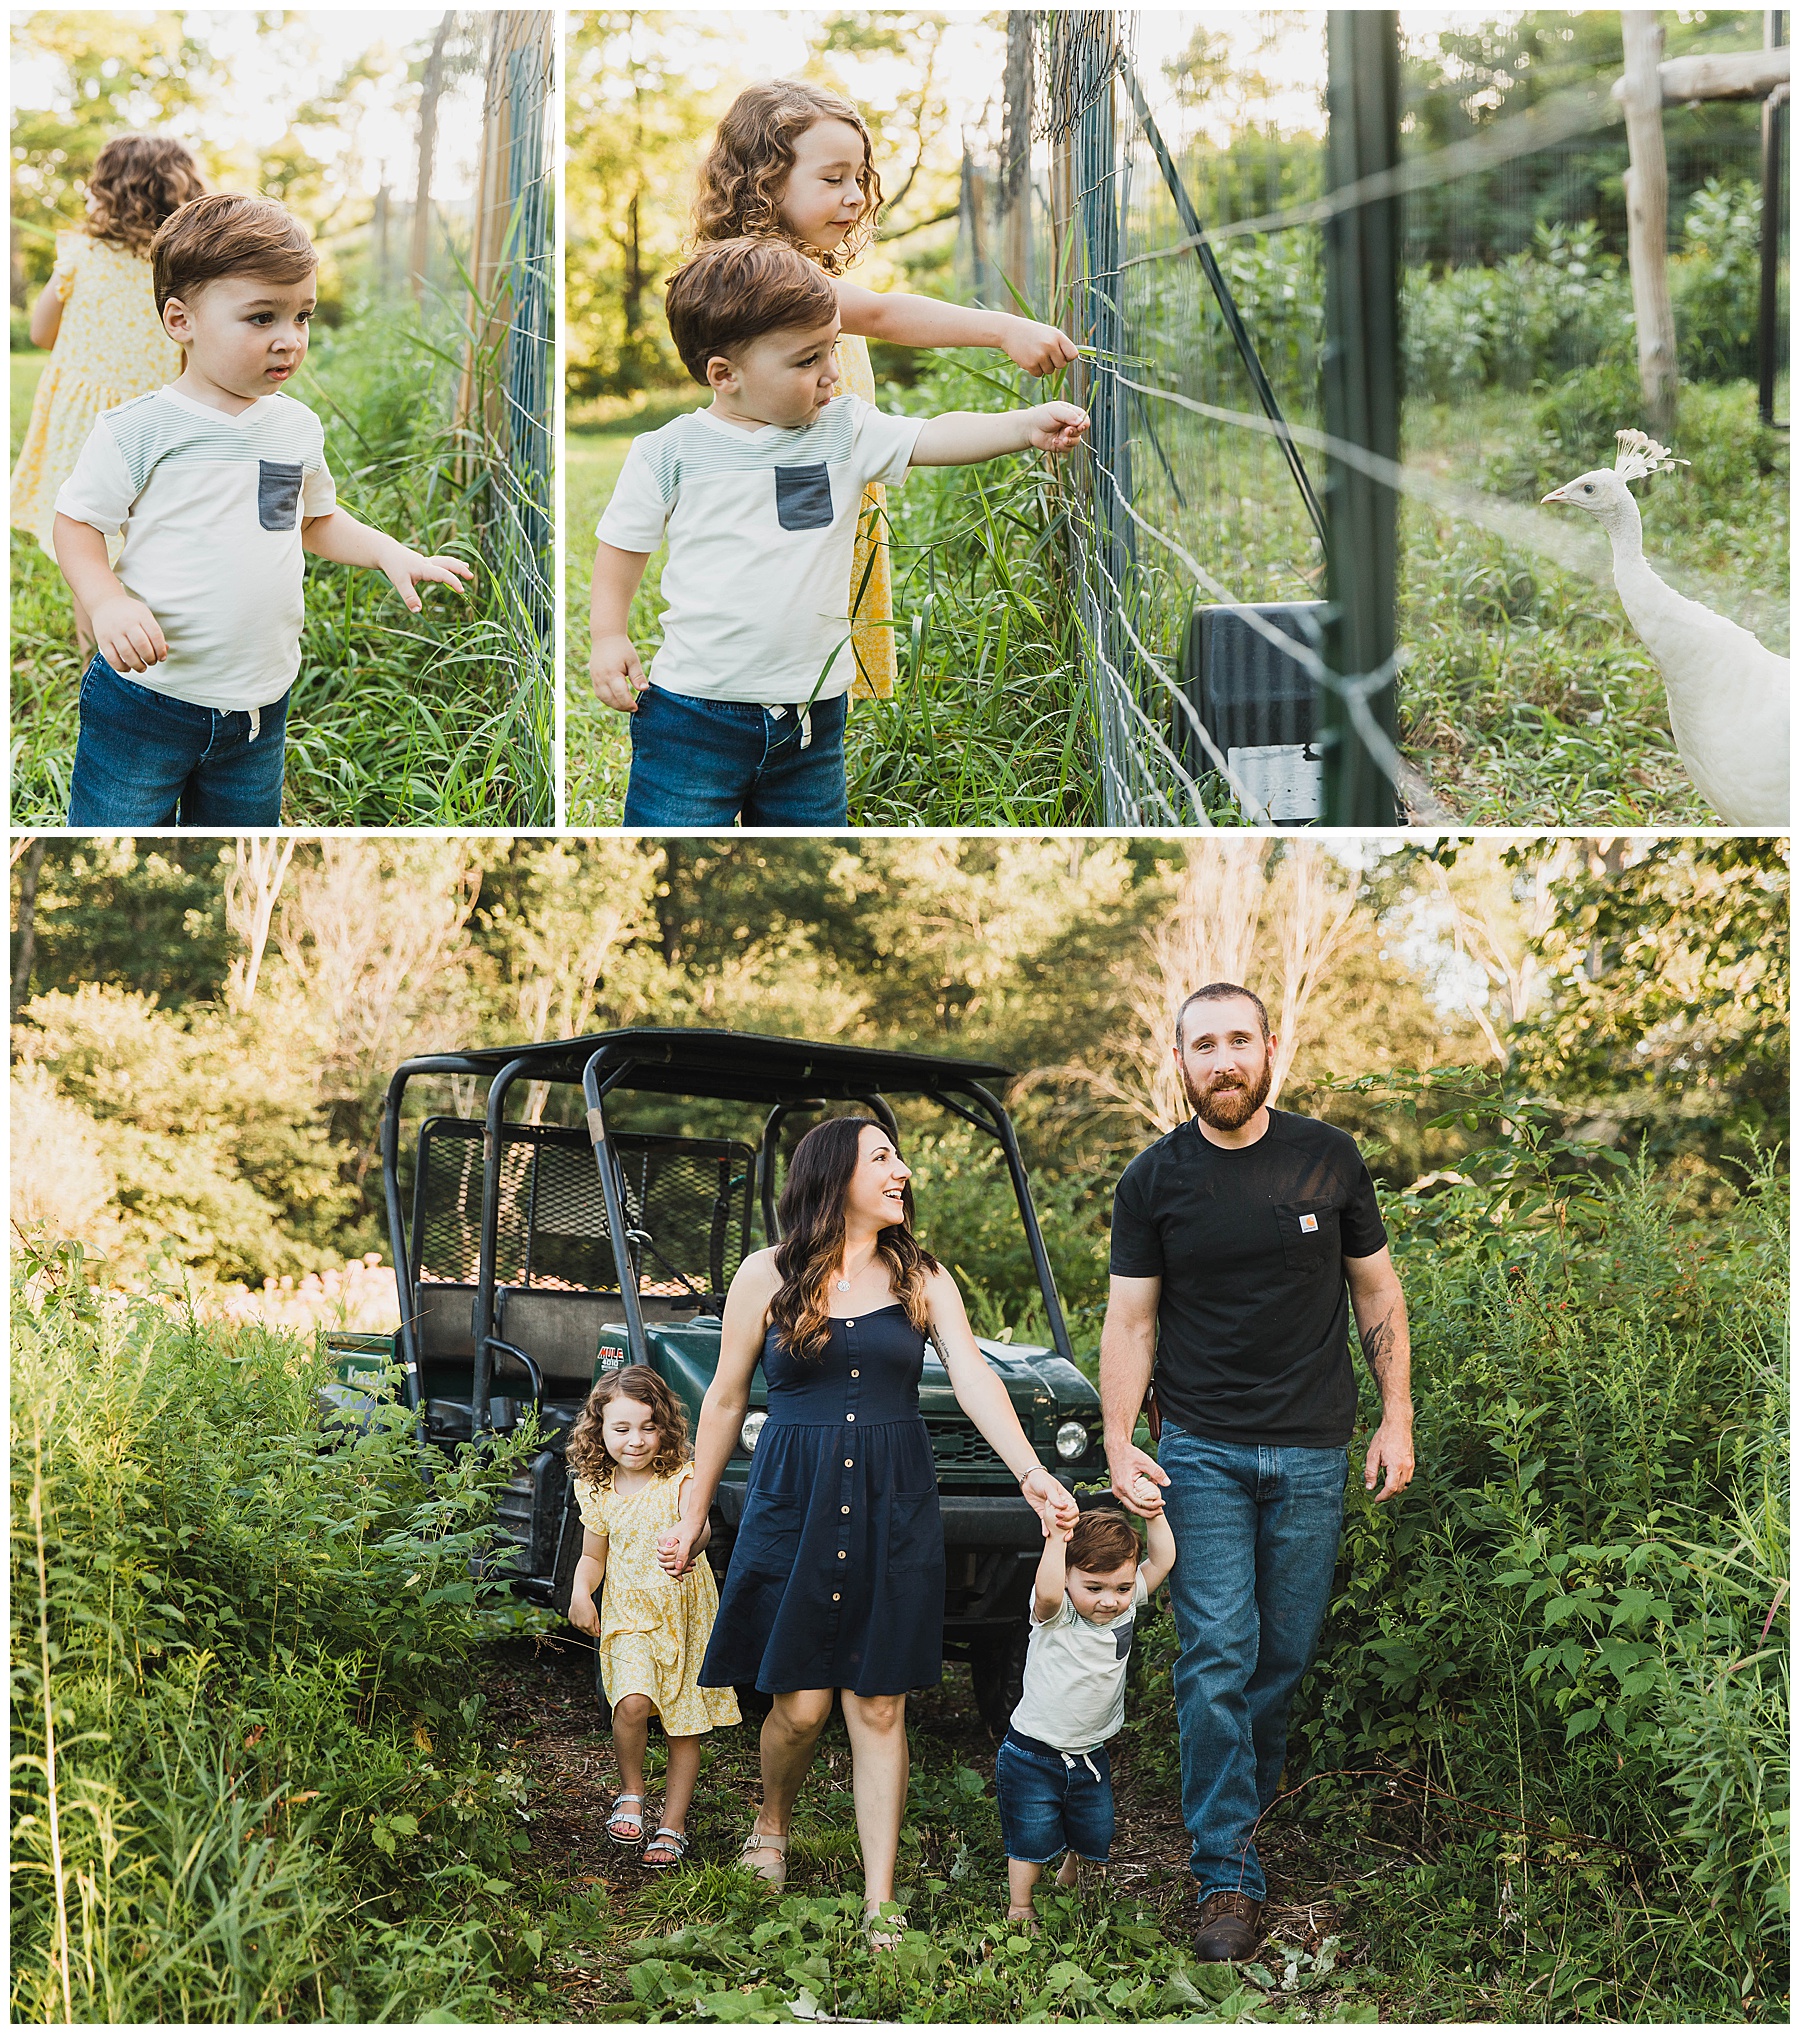 Lifestyle family photographer in Upstate NY, family exploring thier backyard during photo session